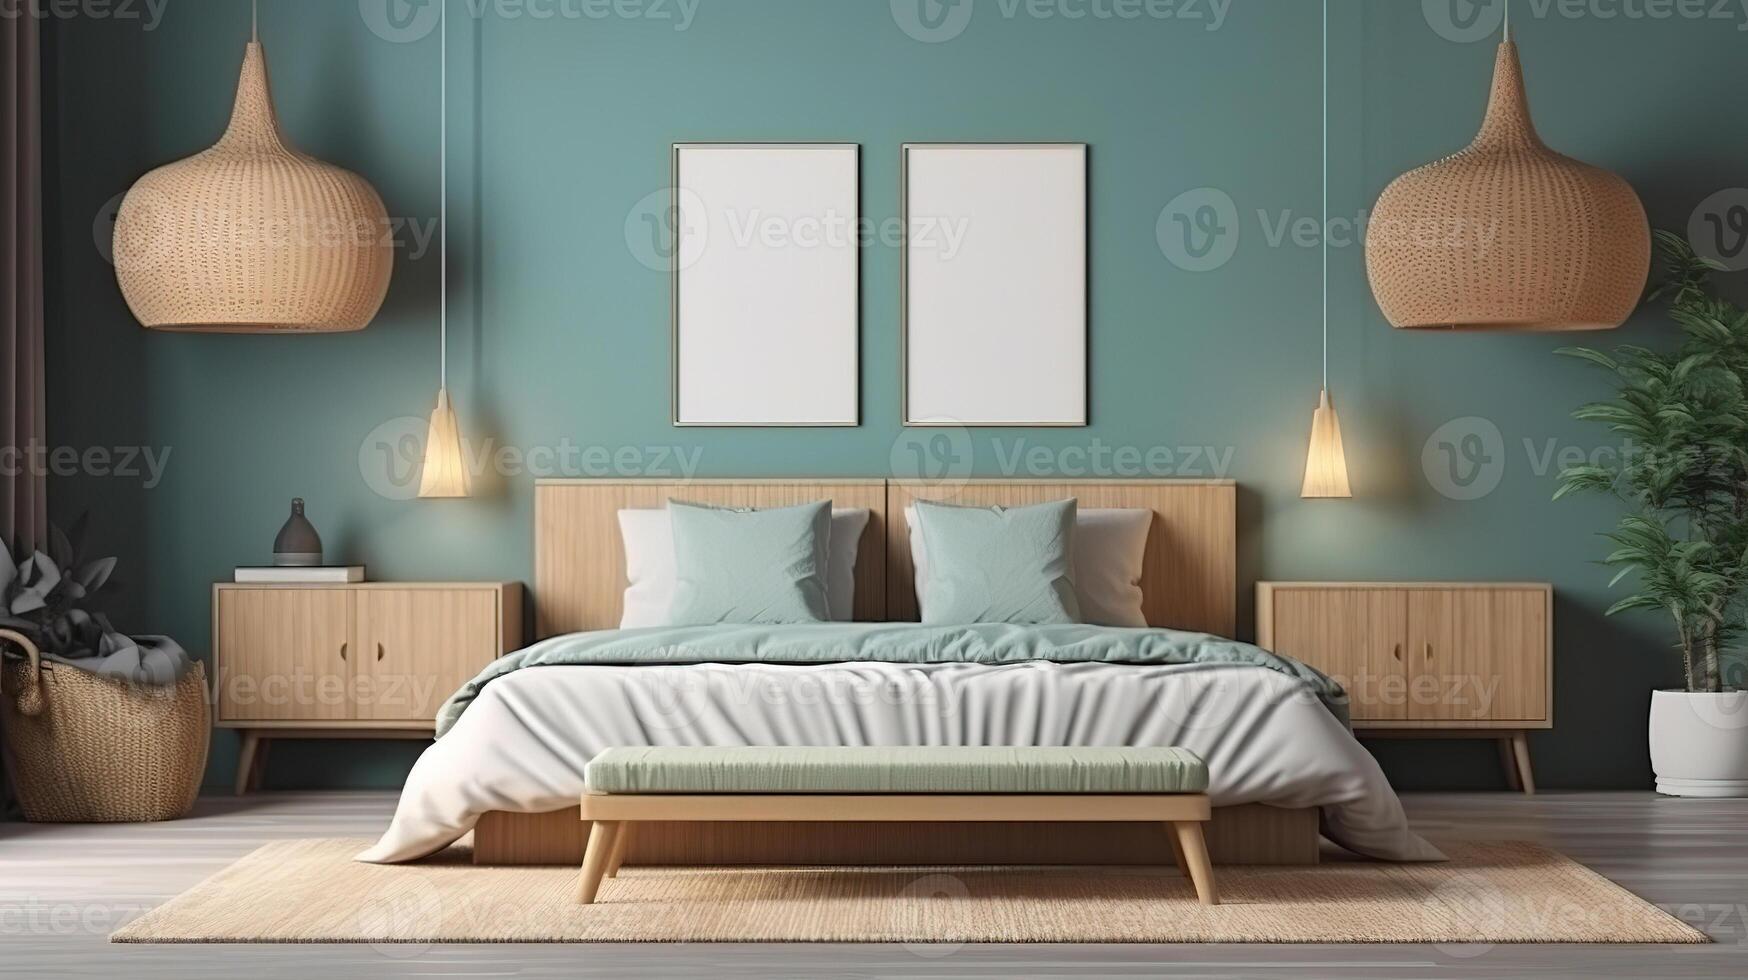 Home mockup, bedroom interior background with rattan furniture and empty frames. photo